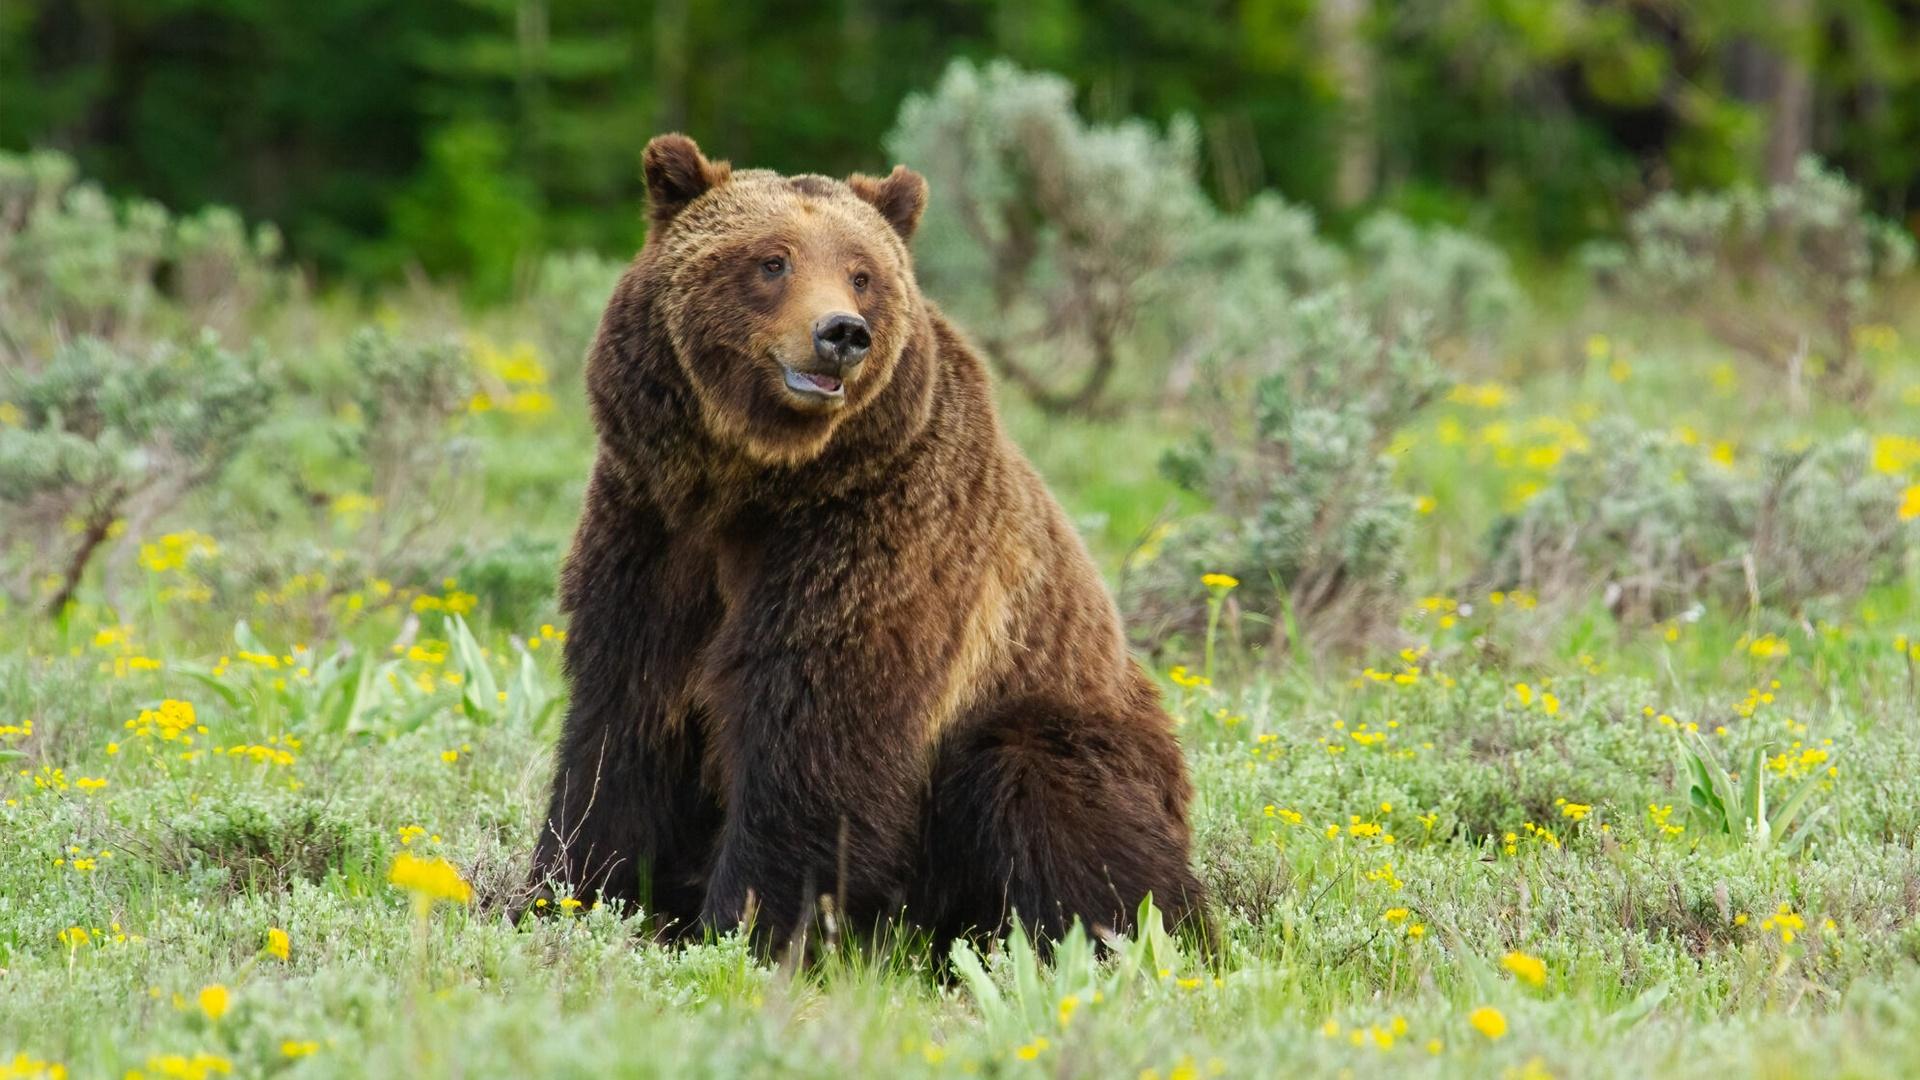 Preview of Grizzly 399: Queen of the Tetons - Wednesday, May 8 @ 7 p.m.